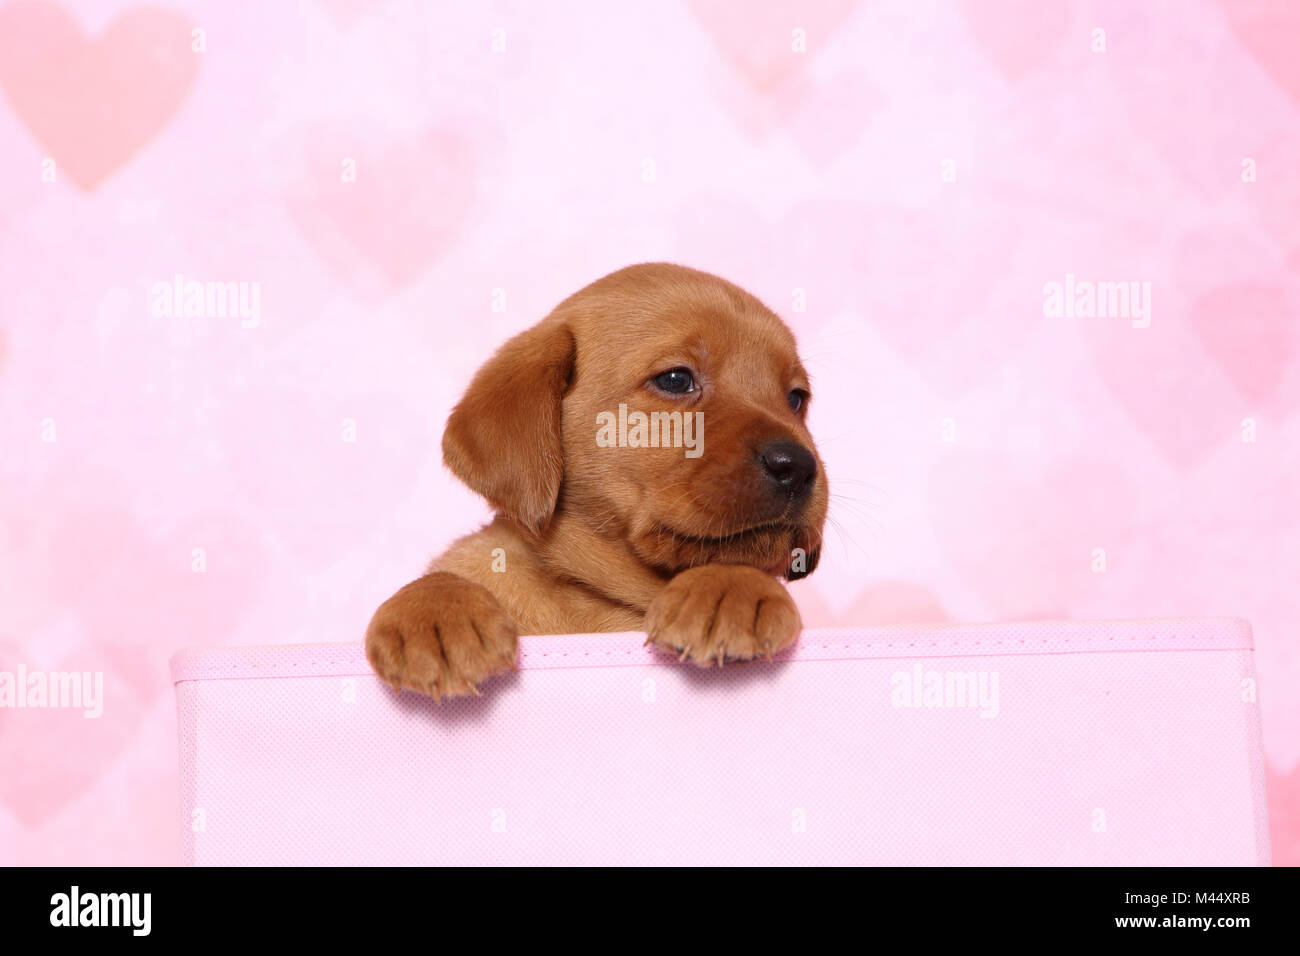 Labrador Retriever. Puppy (6 weeks old) sitting in a pink box. Studio picture seen against a pink background with heart print. Germany Stock Photo